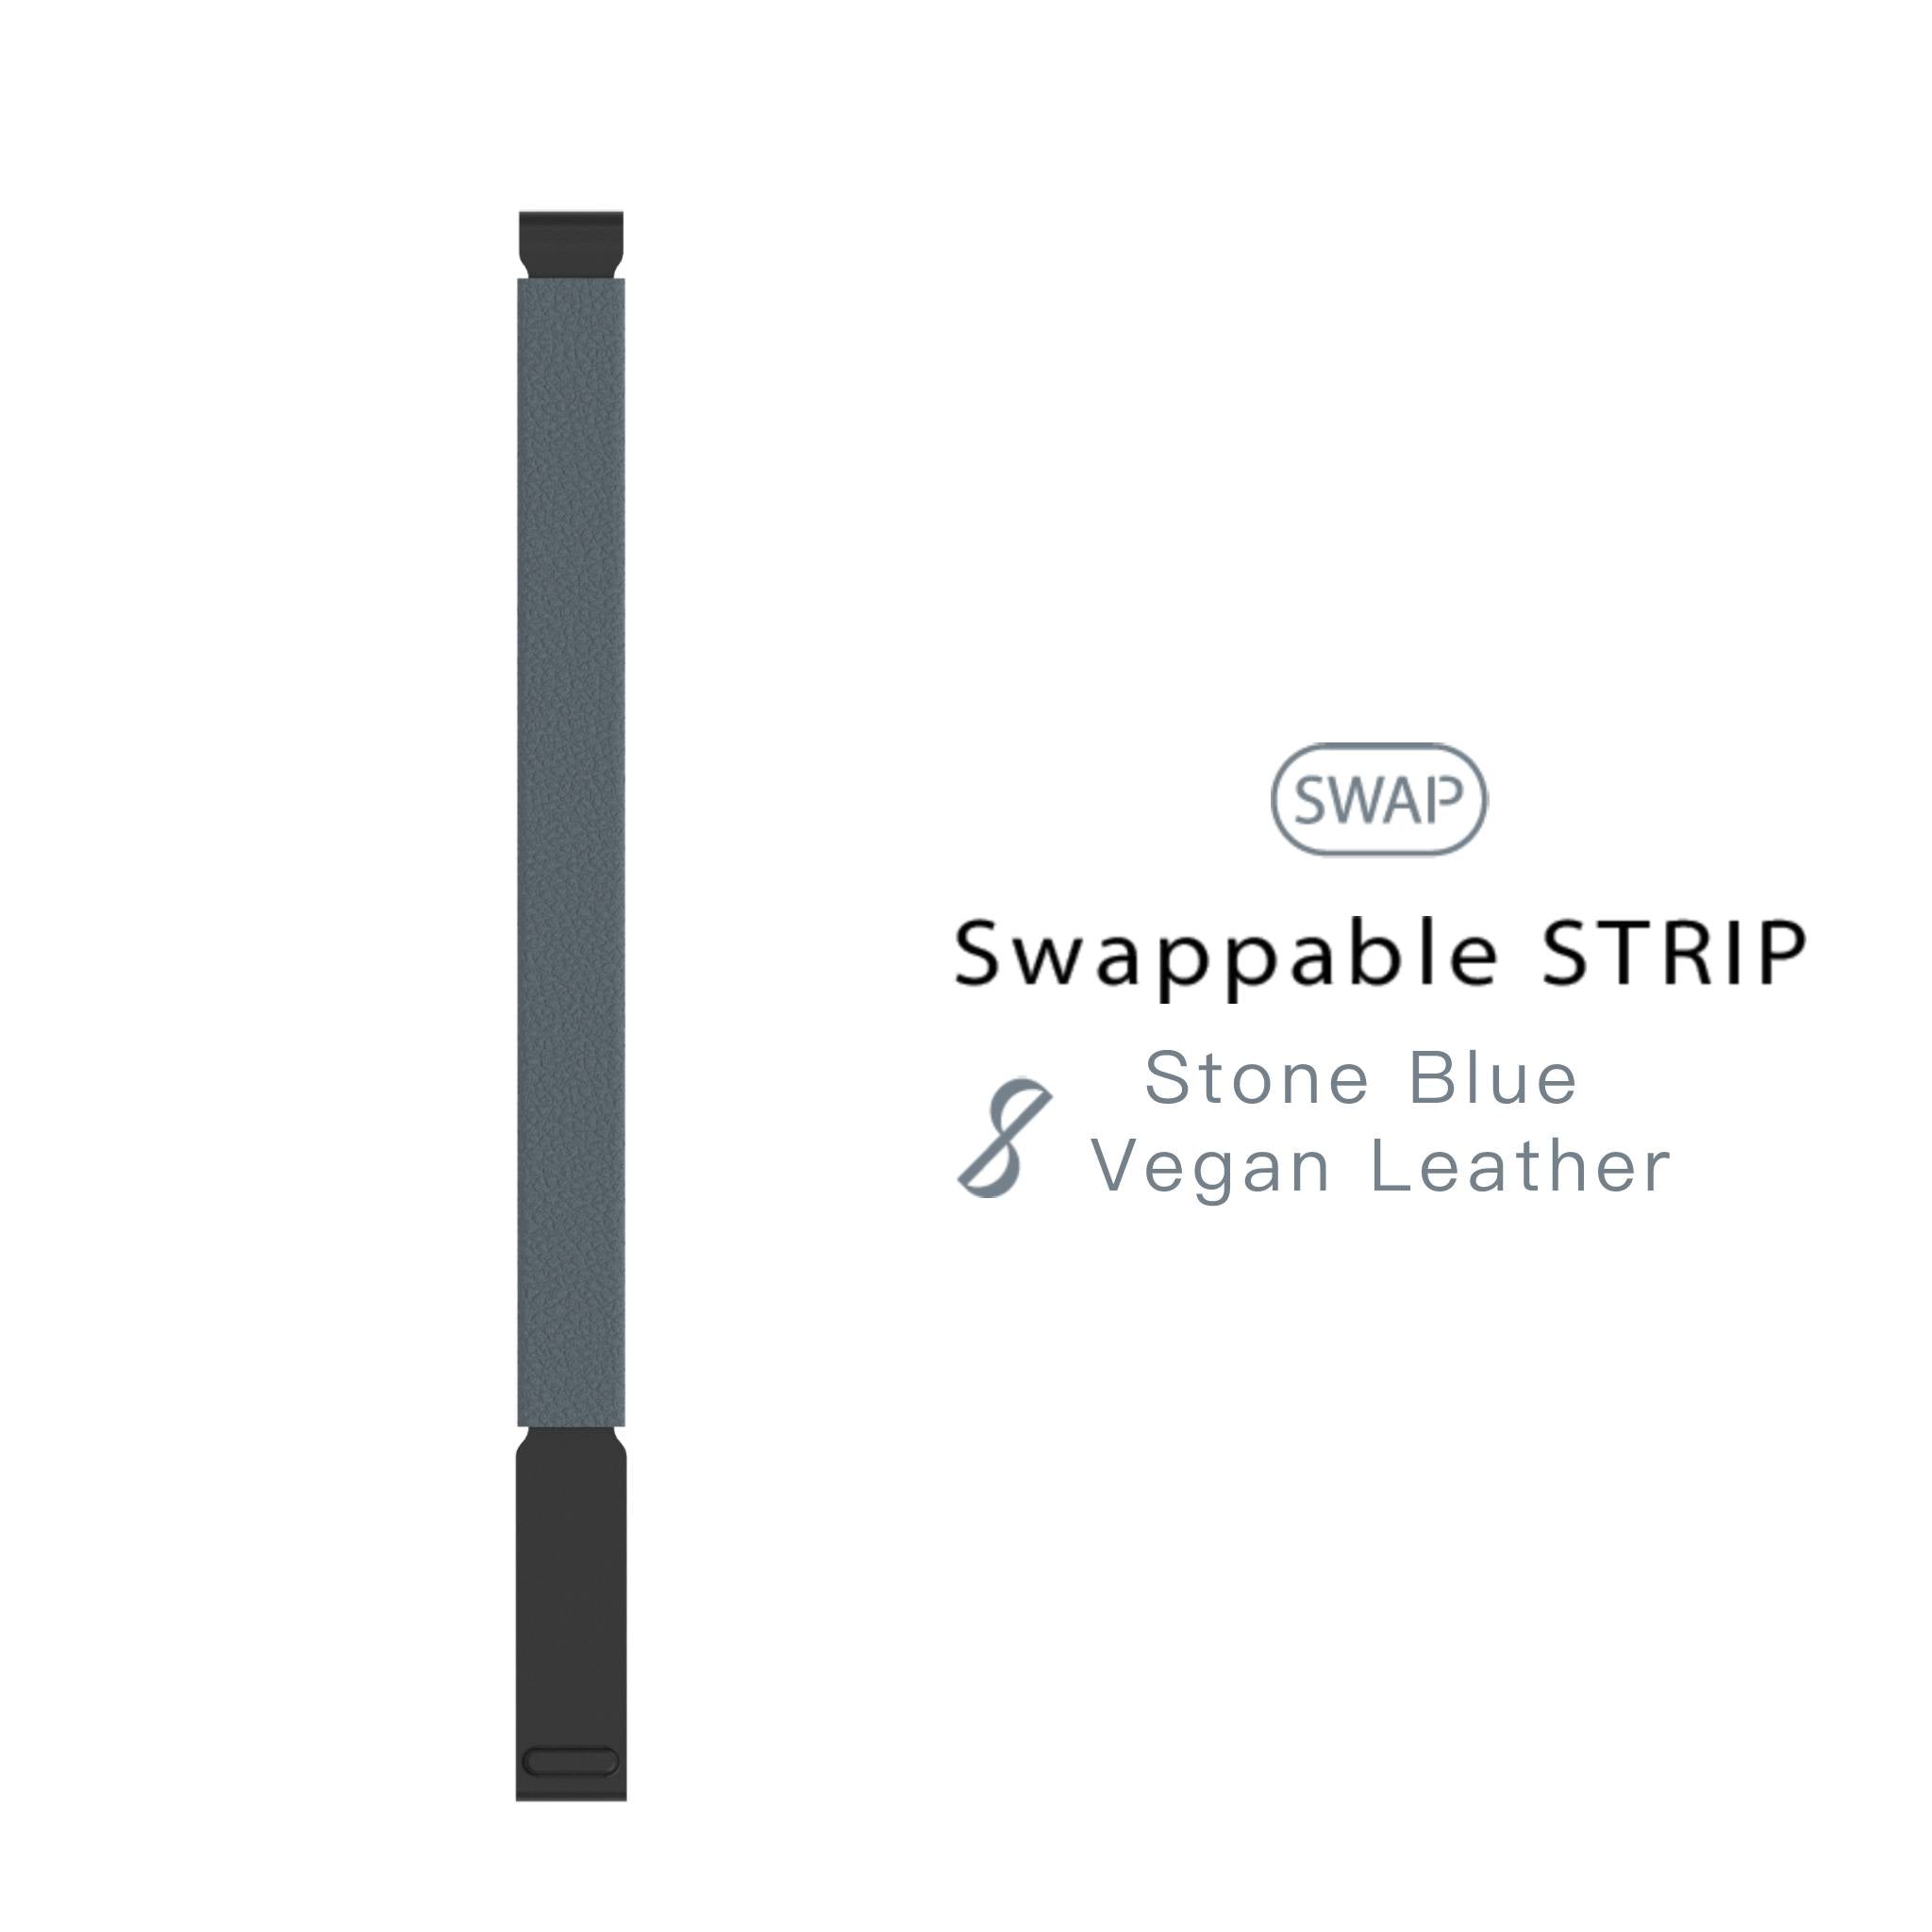 Swappable Strip: Stone Blue Vegan Leather